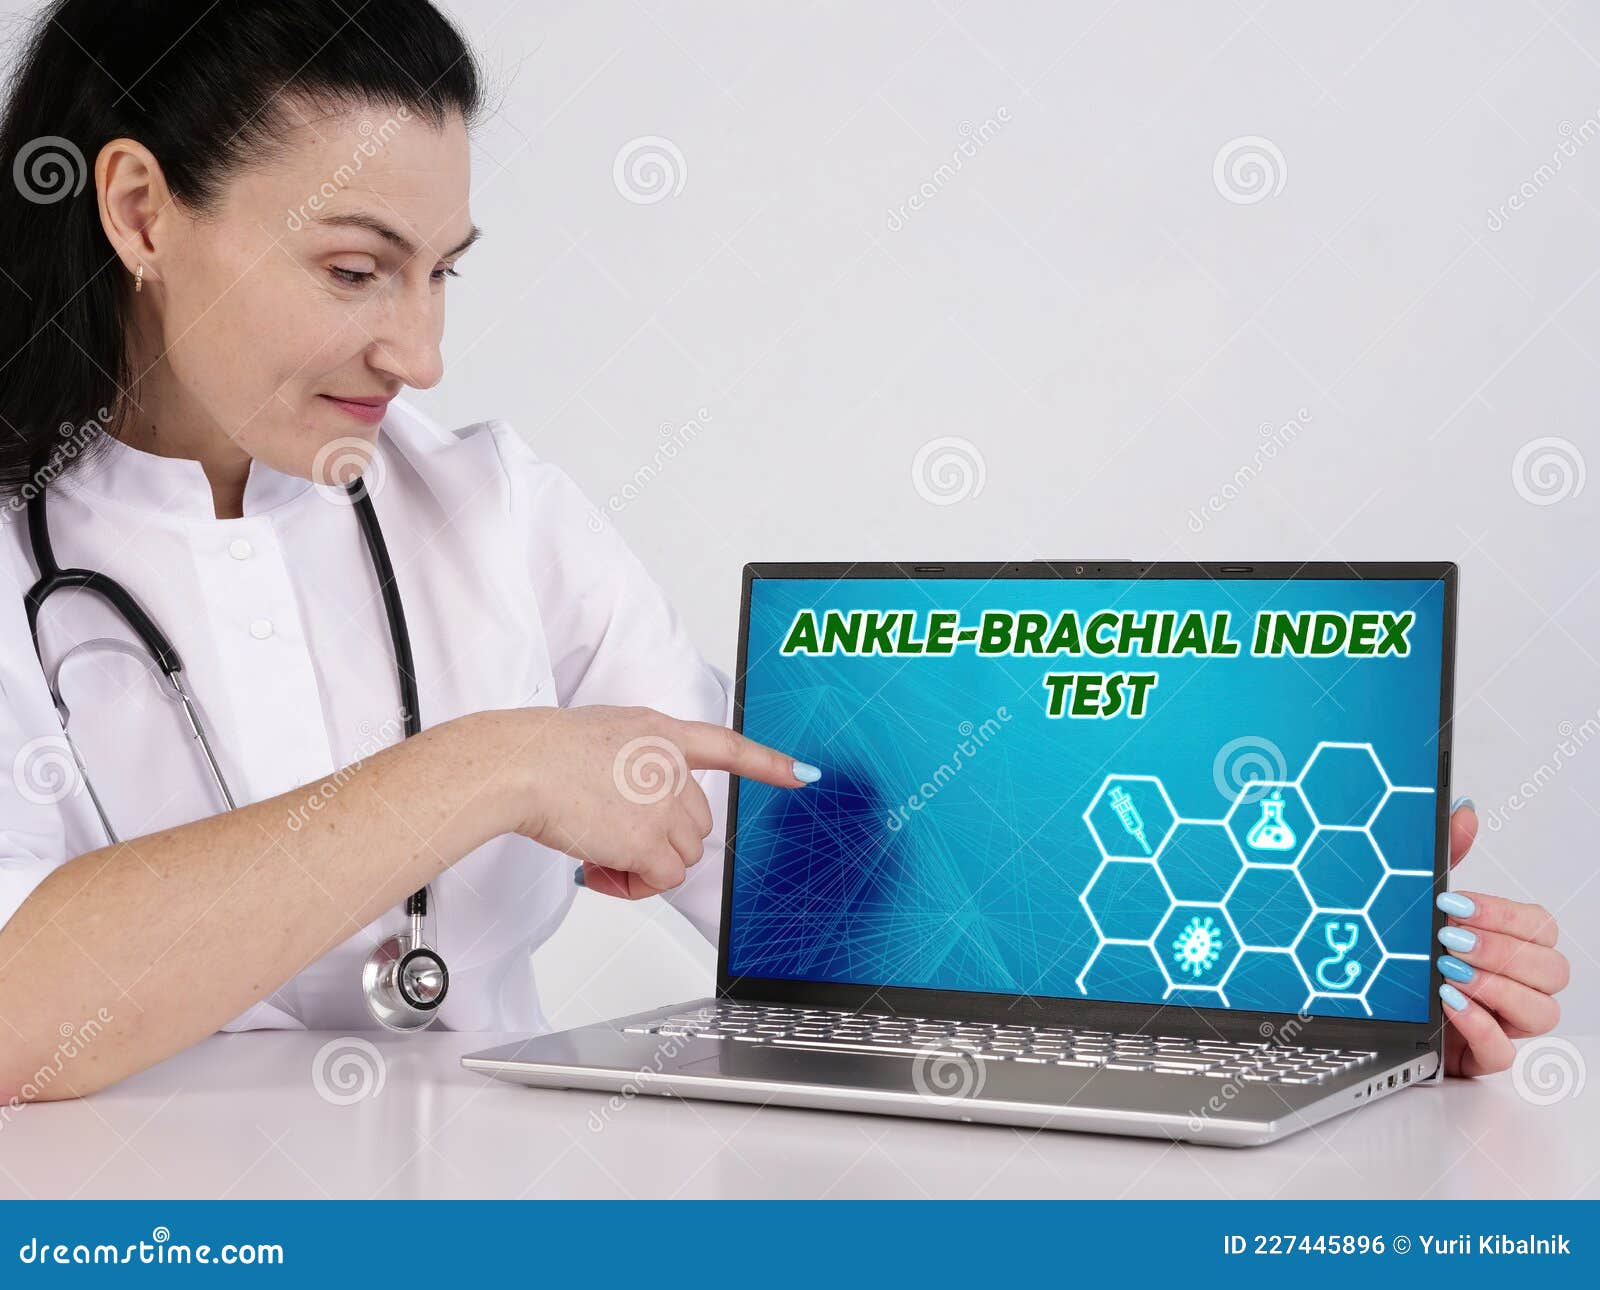 ankle-brachial index test inscription on the screen. close up physician hands holding pen